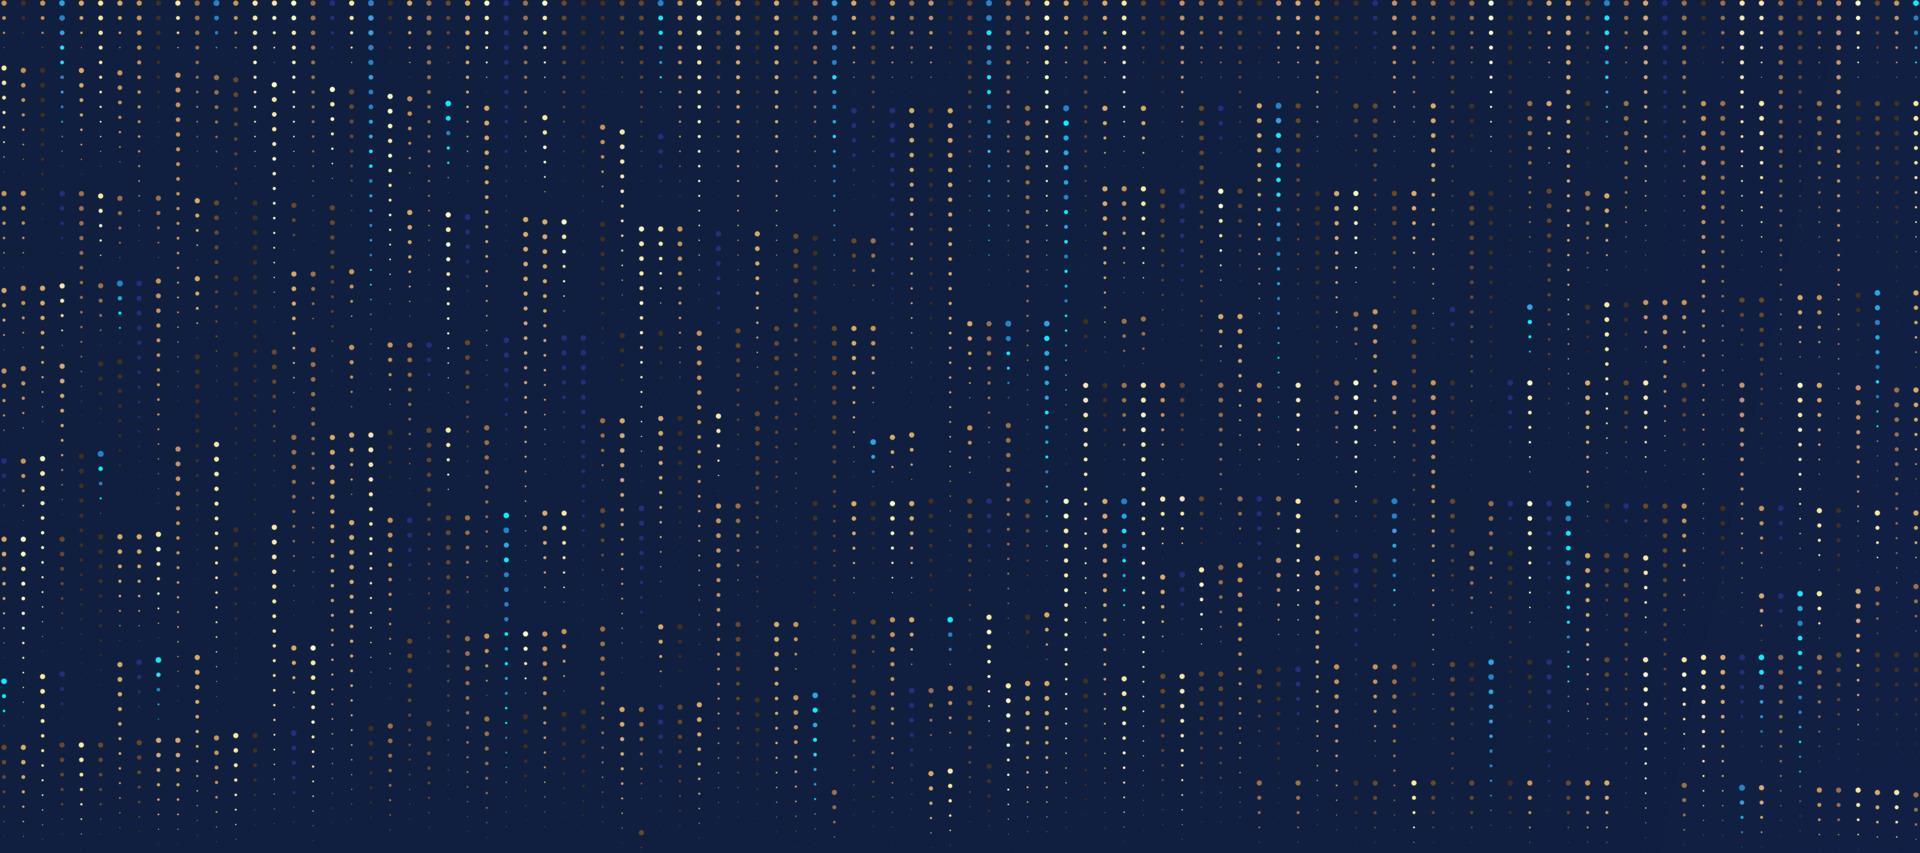 Abstract minimal golden and blue random dotted pattern on dark blue background. Simple modern texture halftone style. Luxury and elegant style. Design for cover template, poster, banner web, Print ad. vector